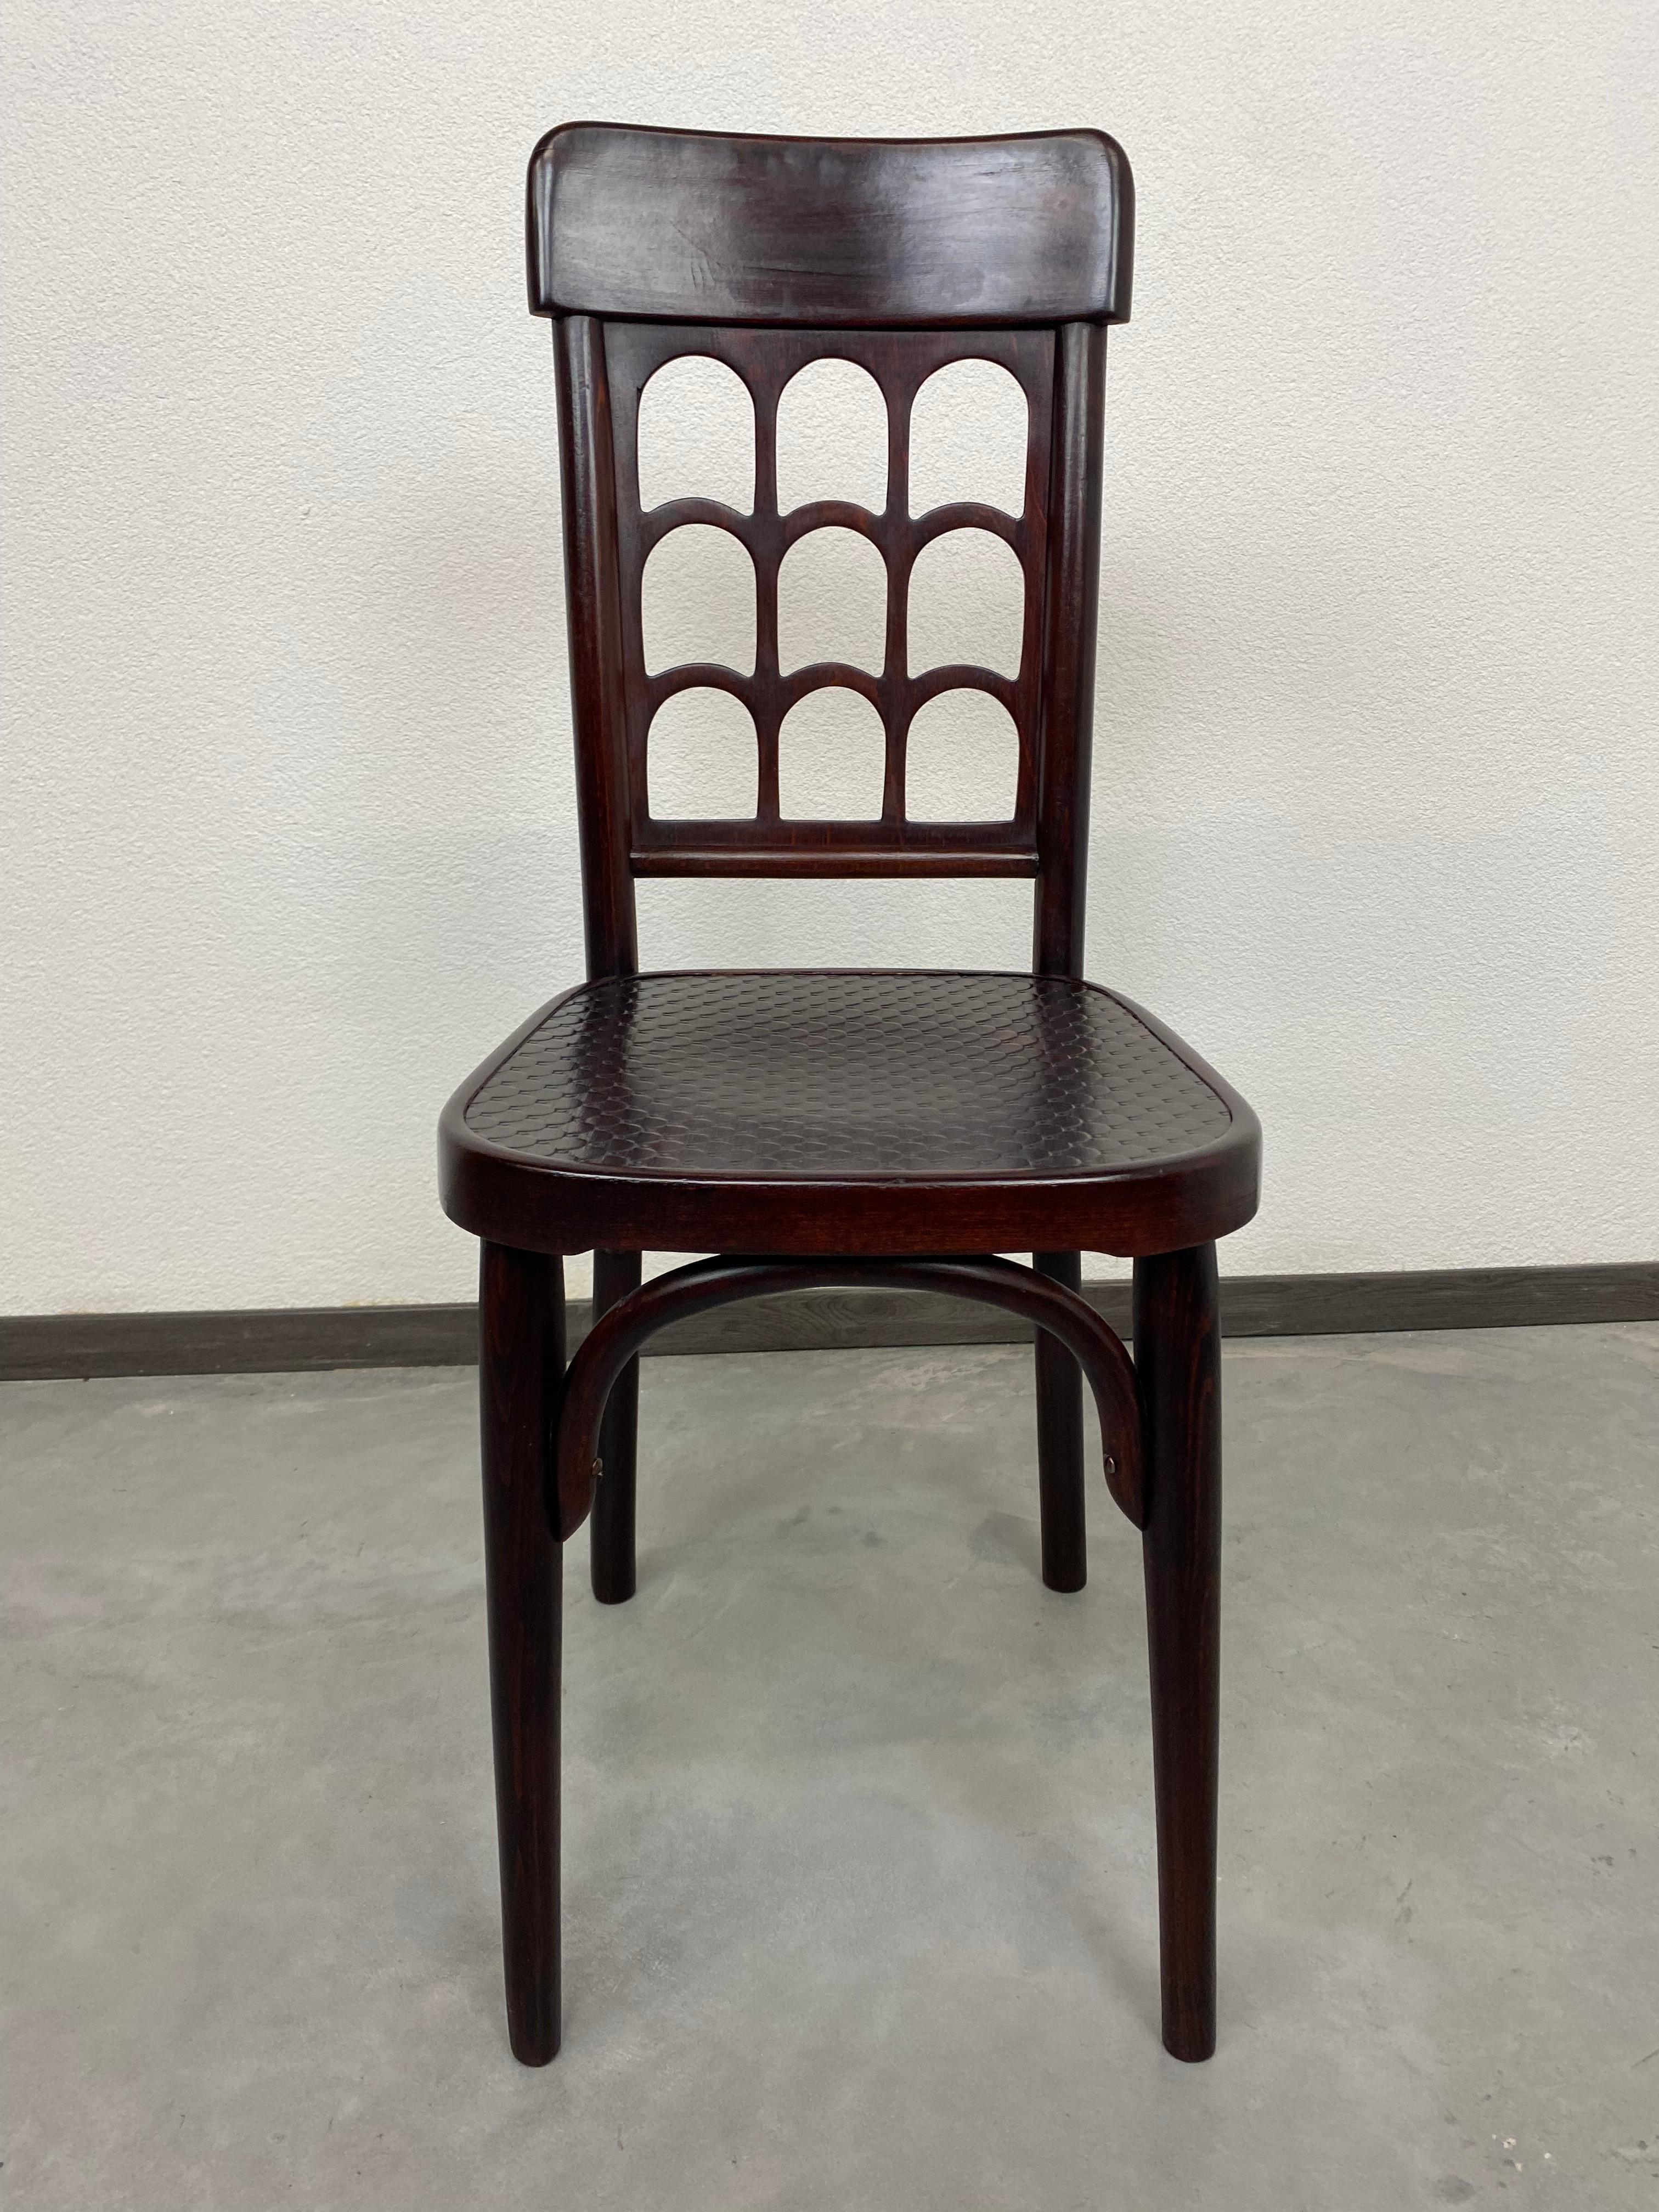 Josef Hoffmann Beehive Dining Chairs In Excellent Condition For Sale In Banská Štiavnica, SK